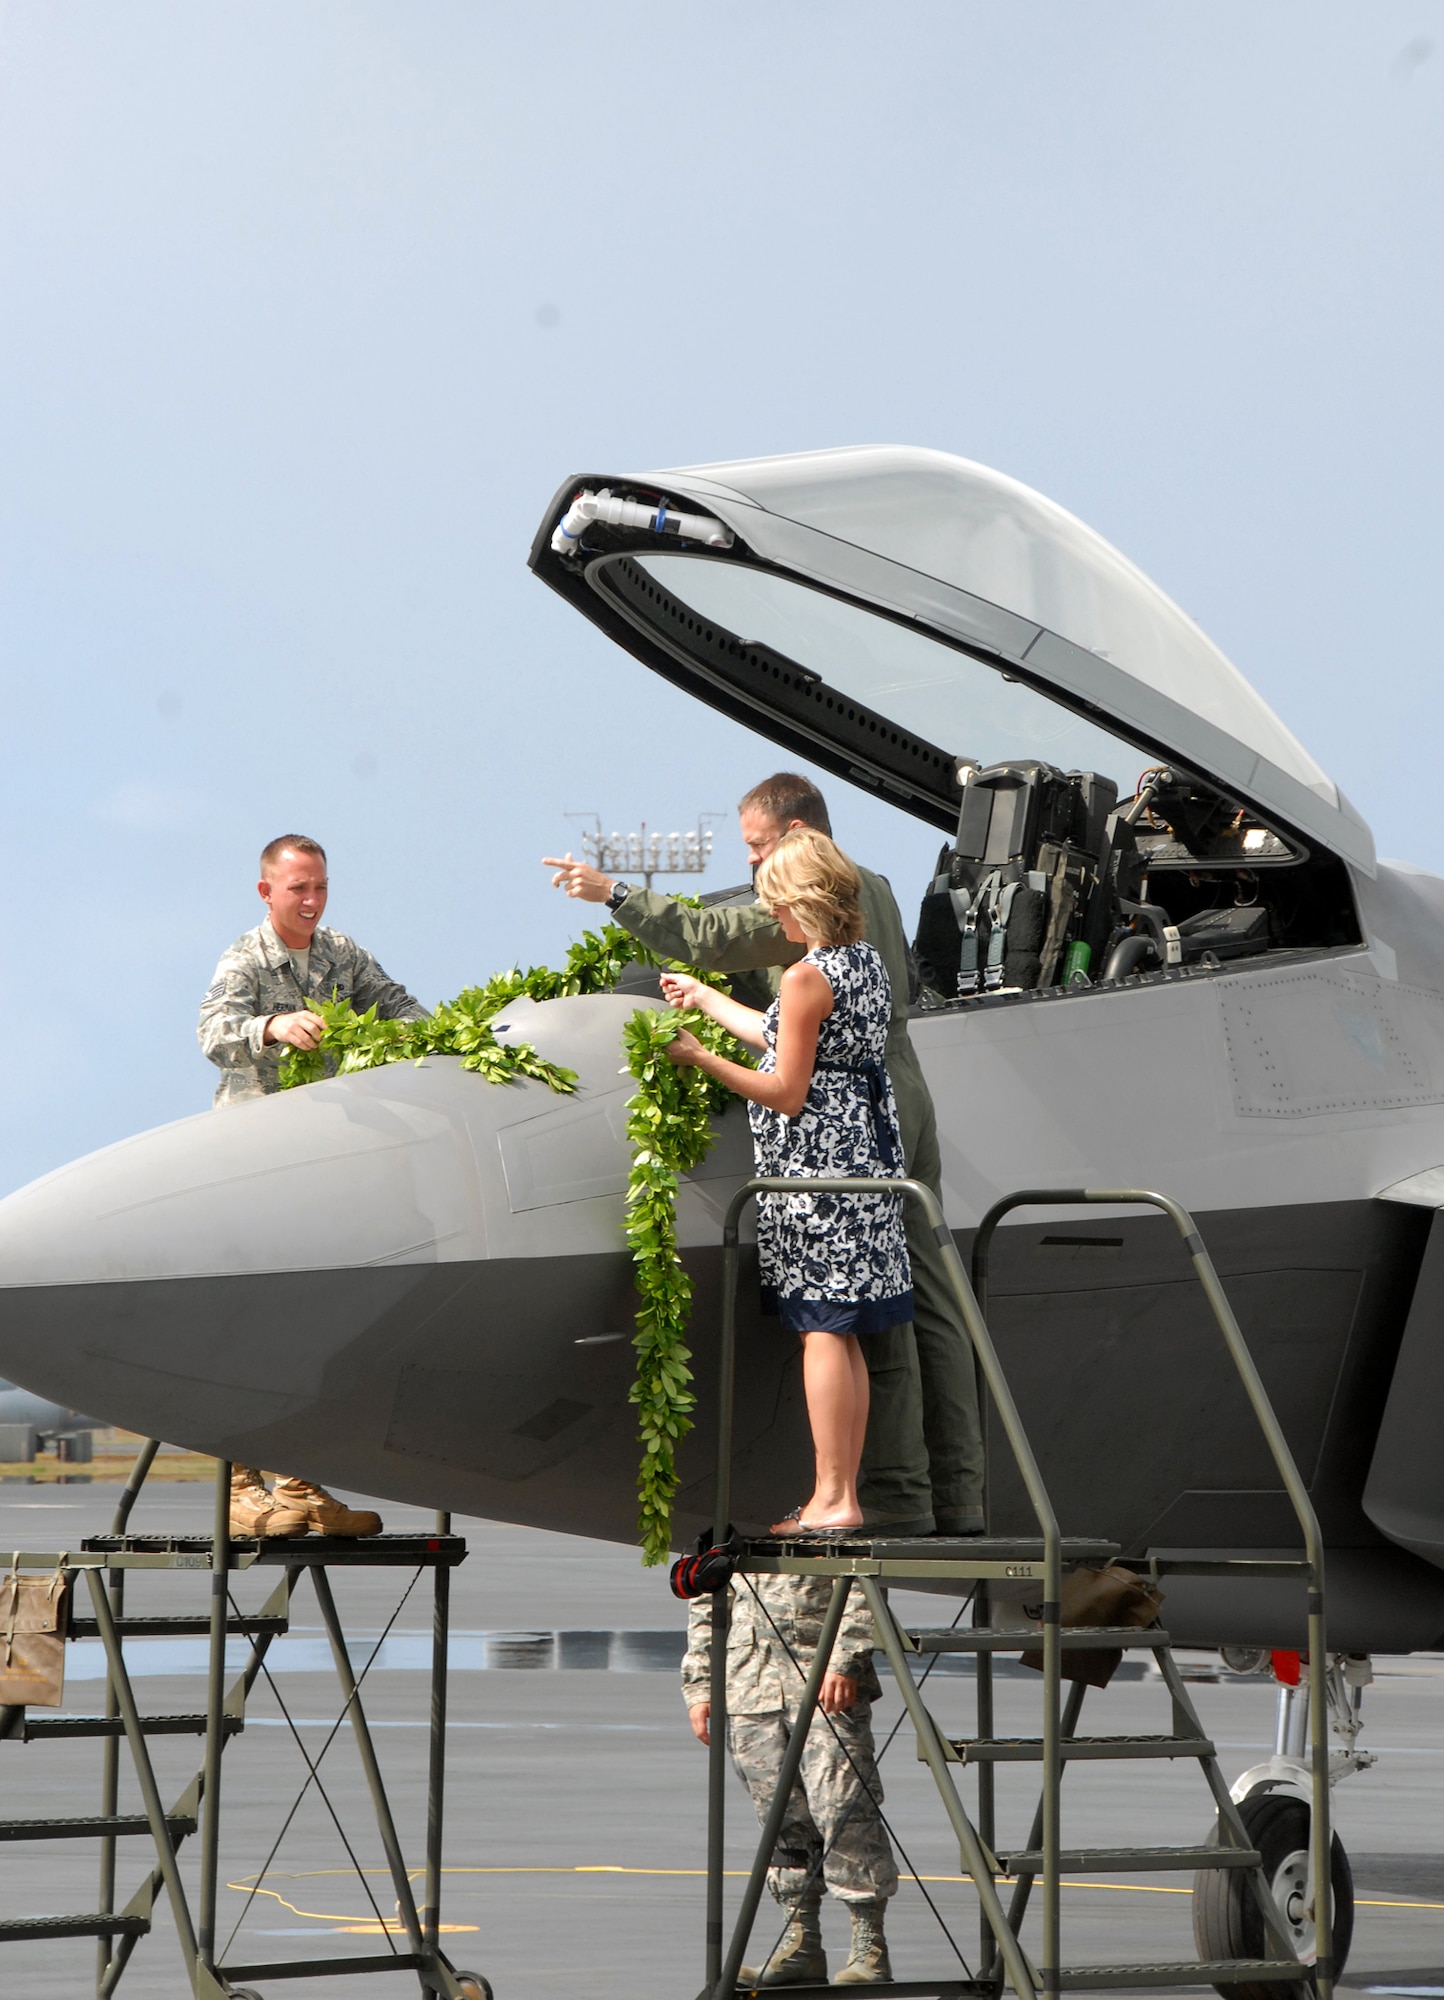 Lt. Col. Harvey "Banger" Newton, pilot 19th Fighter Squadron, along with his wife and Staff Sgt. Joel Herman, an active duty F-22 Raptor crew chief assigned to the 154th Wing Aircraft Maintenance Squadron, Hawaii Air National Guard, drape maile lei across the nose of the F-22 Raptor during the F-22 Arrival Ceremony July 9, on Joint Base Pearl Harbor-Hickam, Hawaii. Maile lei is part of a Hawaiian tradition used to mark important occasions. The arrival of the F-22 Raptor marks the beginning of a new associate unit between the Hawaii Air National Guard and the 15th Wing, active duty Air Force. (U.S. Air Force photo/Tech. Sgt. Betty J. Squatrito-Martin)